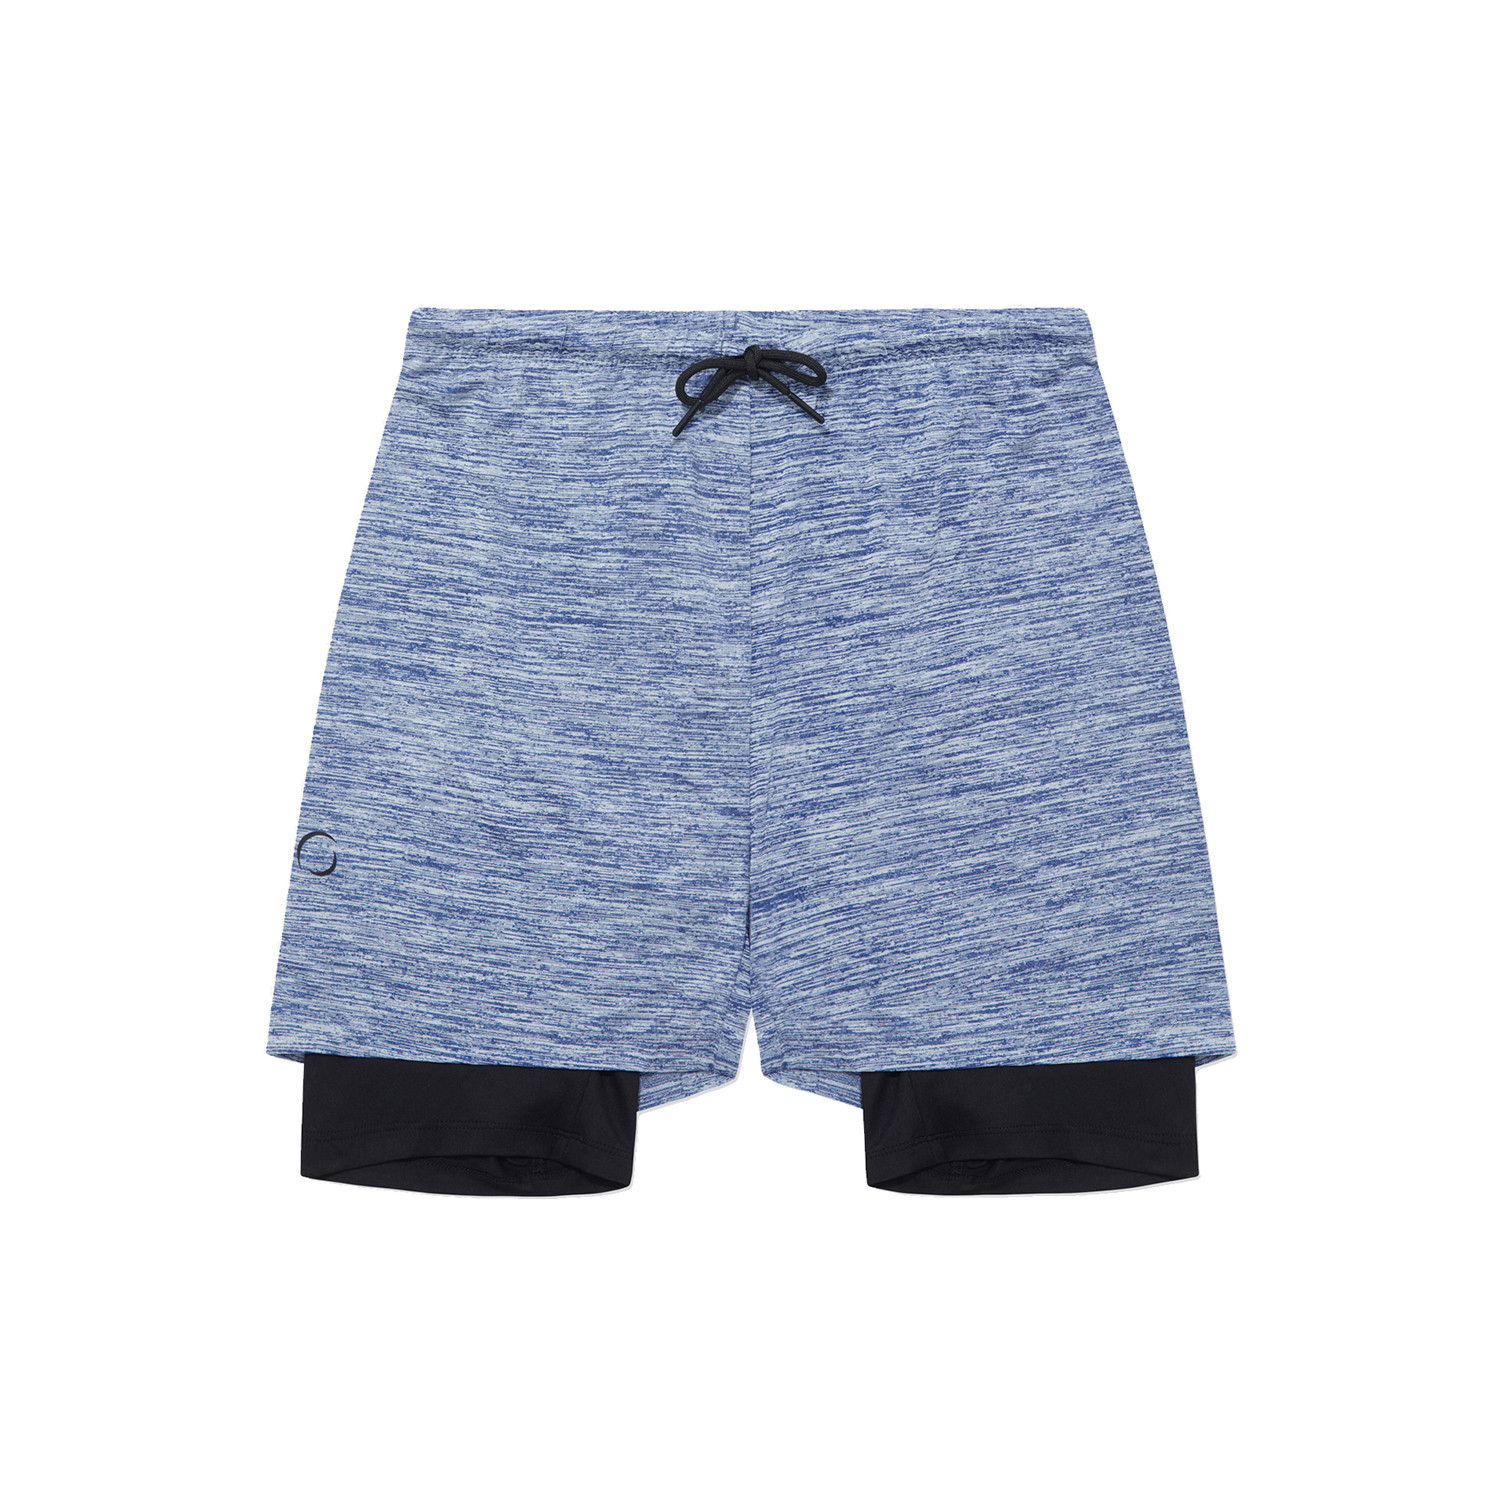 ohmme shorts